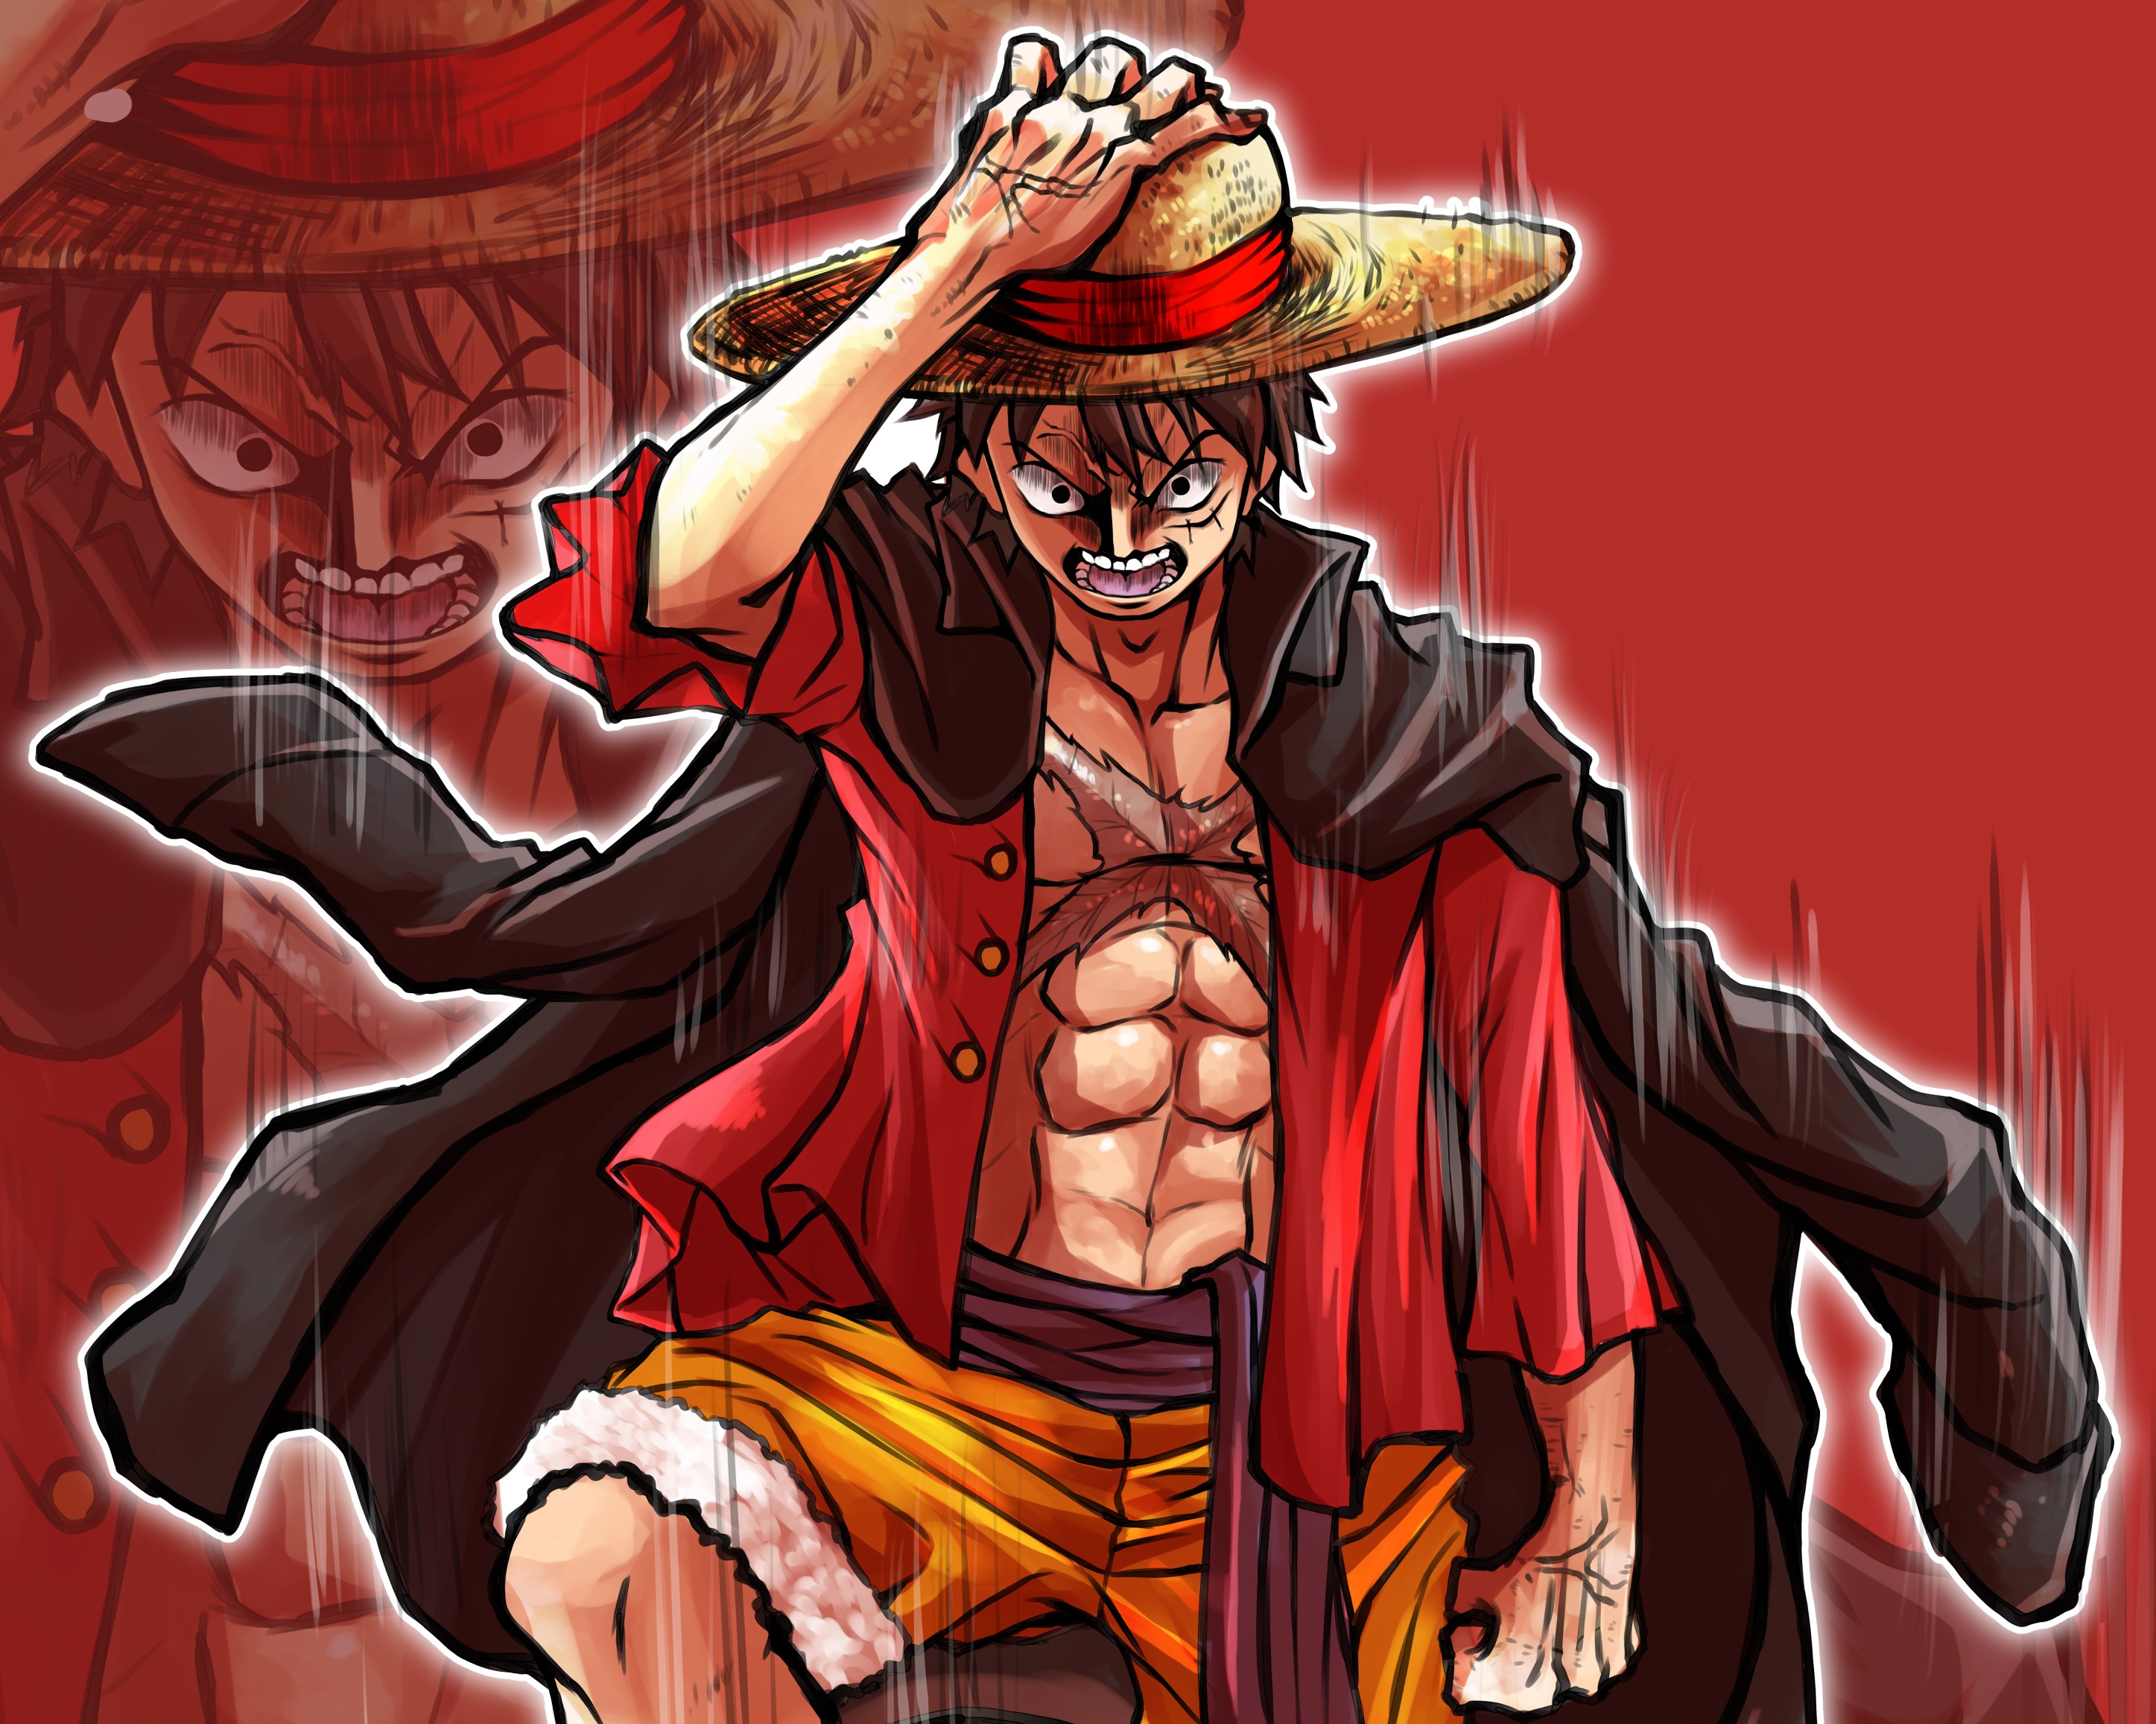 2,166 One Piece Anime Images, Stock Photos & Vectors | Shutterstock